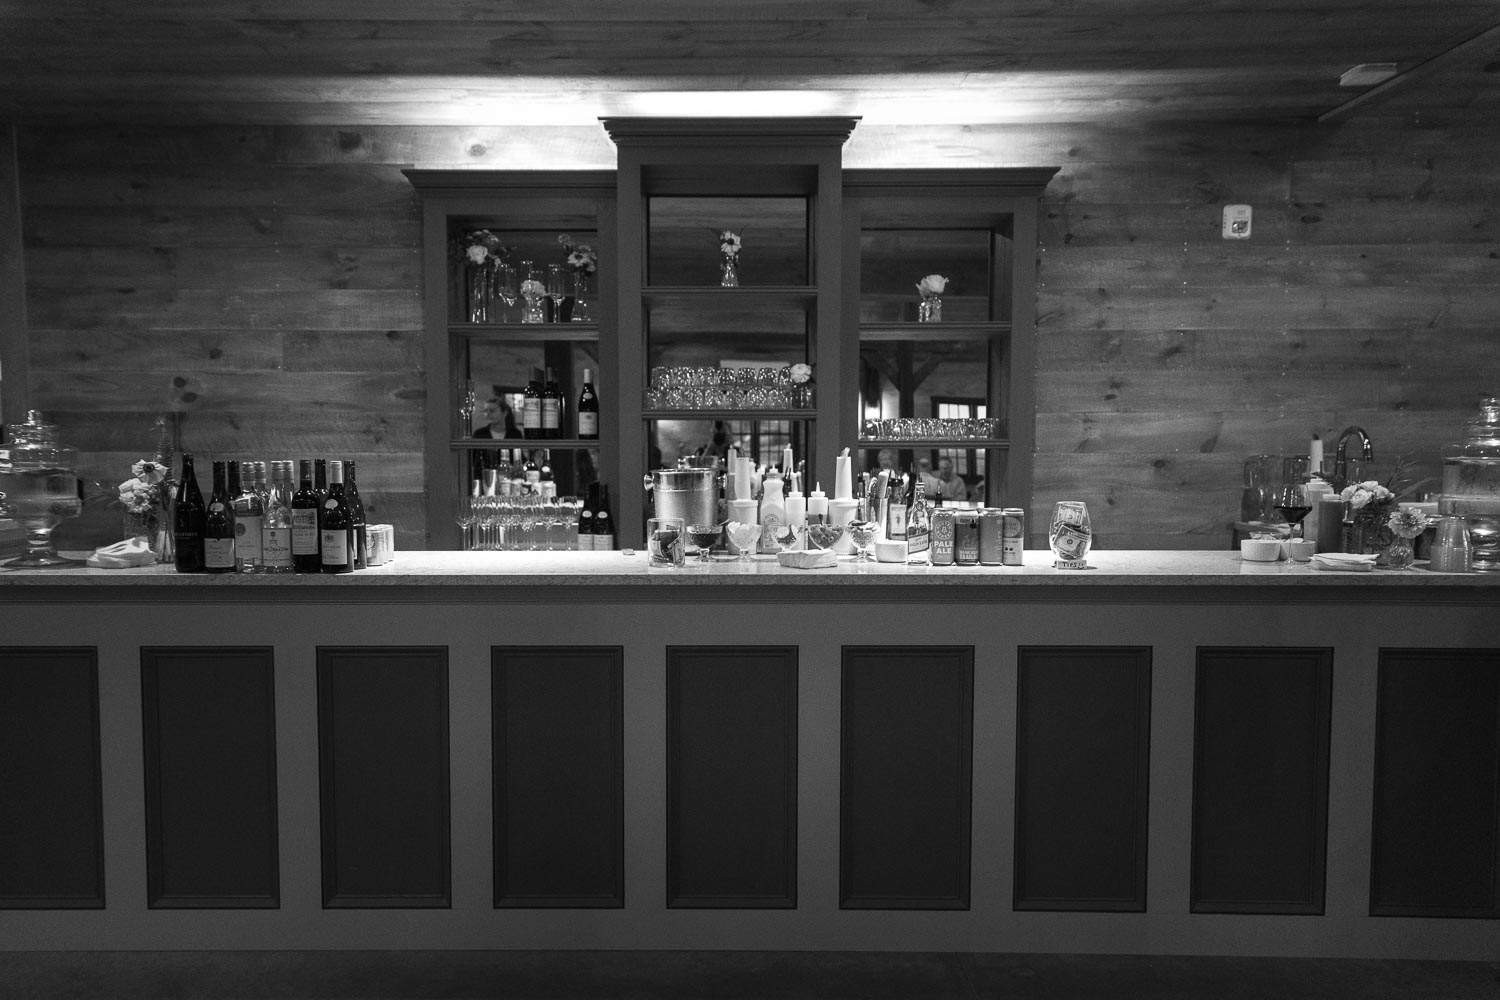 Black and white image of an empty bar counter with stools, bottles, and glasses, set against a wooden backdrop.